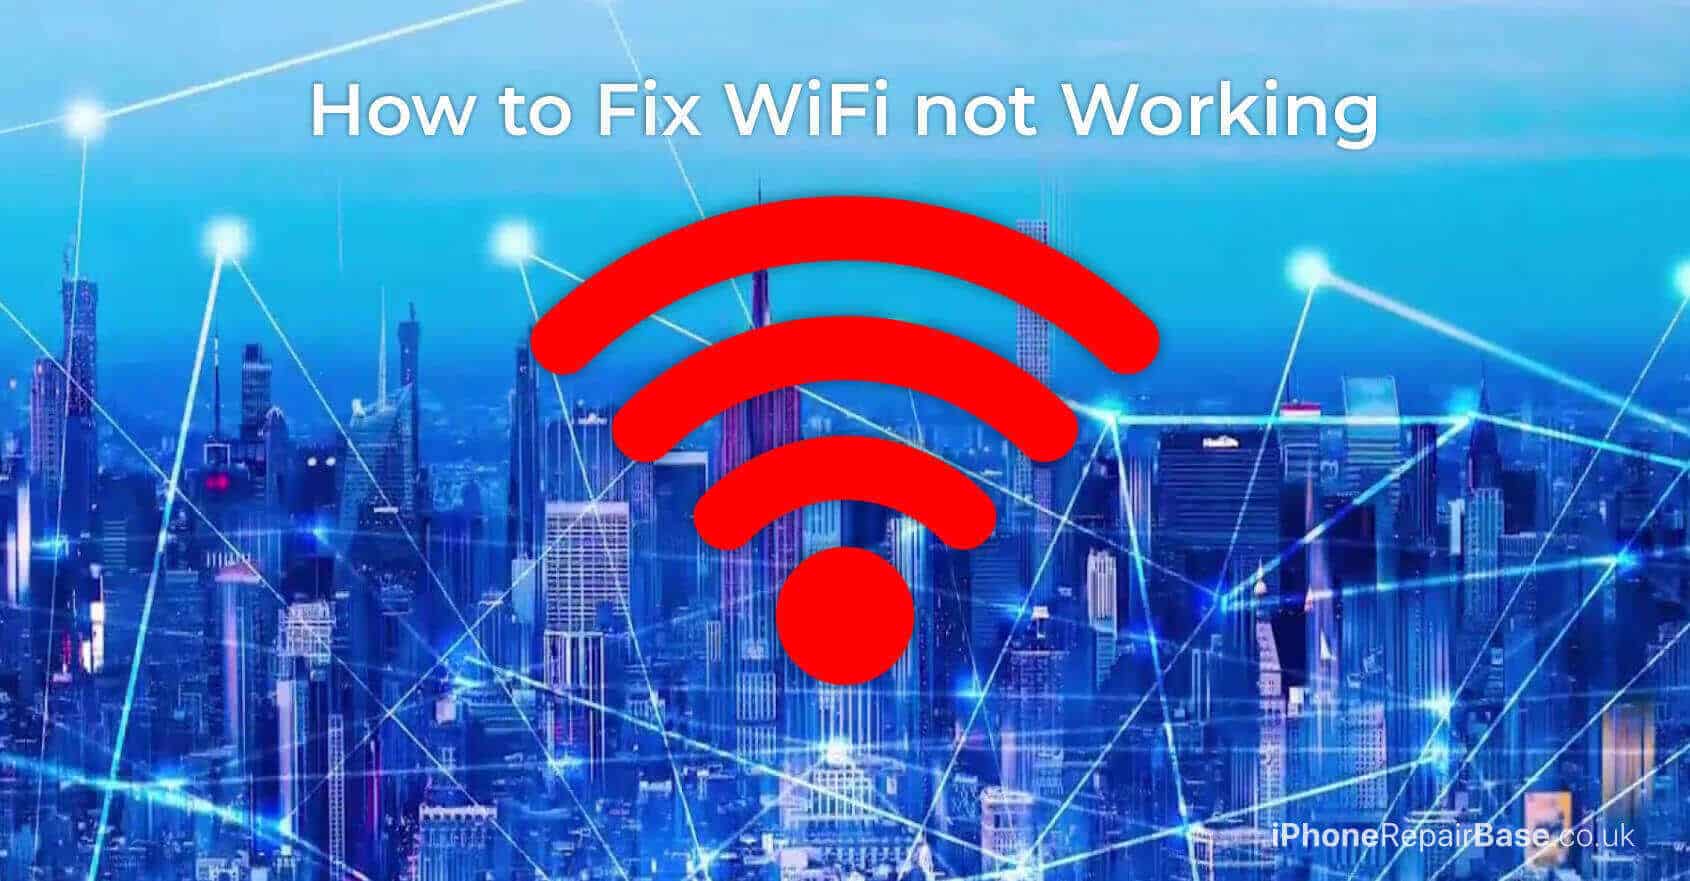 iPhone connects to wi-fi but it doesn't work